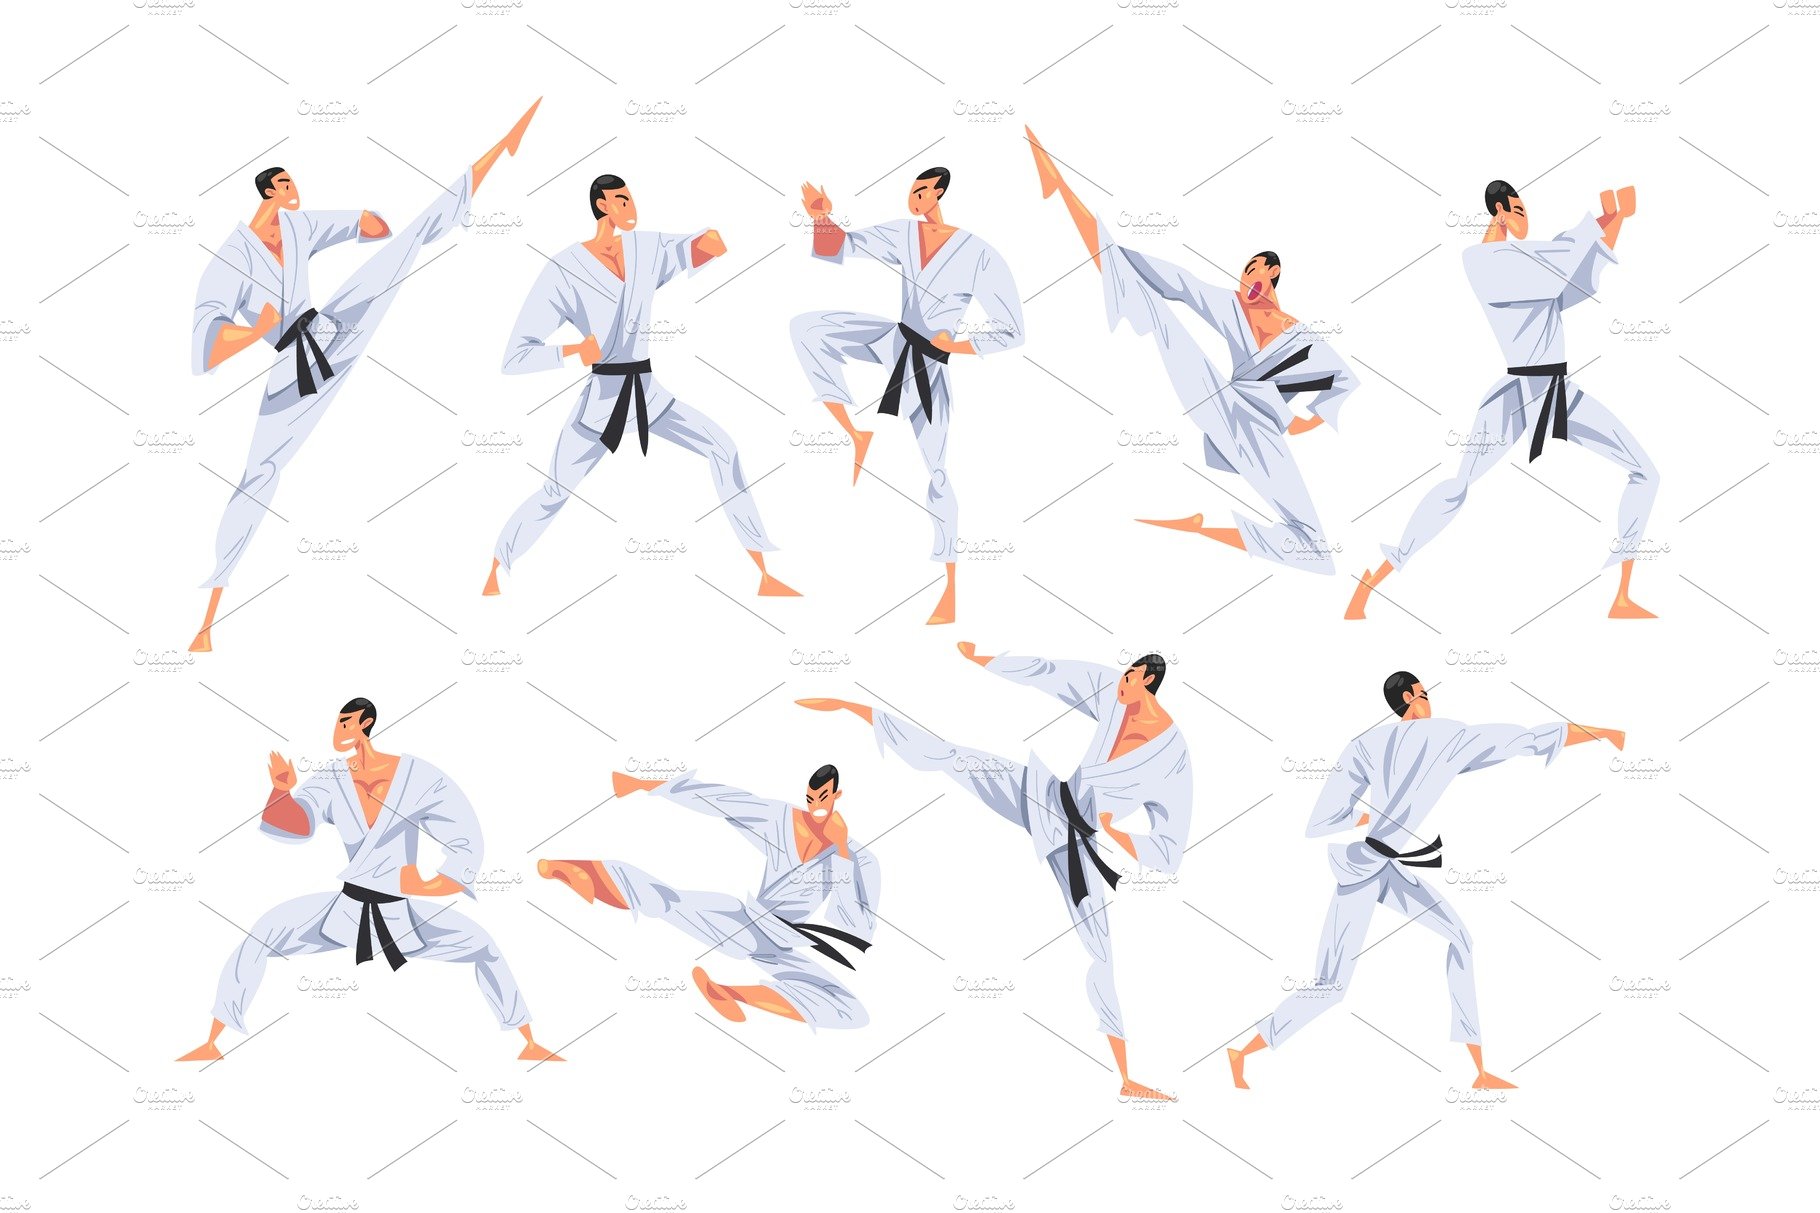 Martial arts poses by Lite-mike on DeviantArt